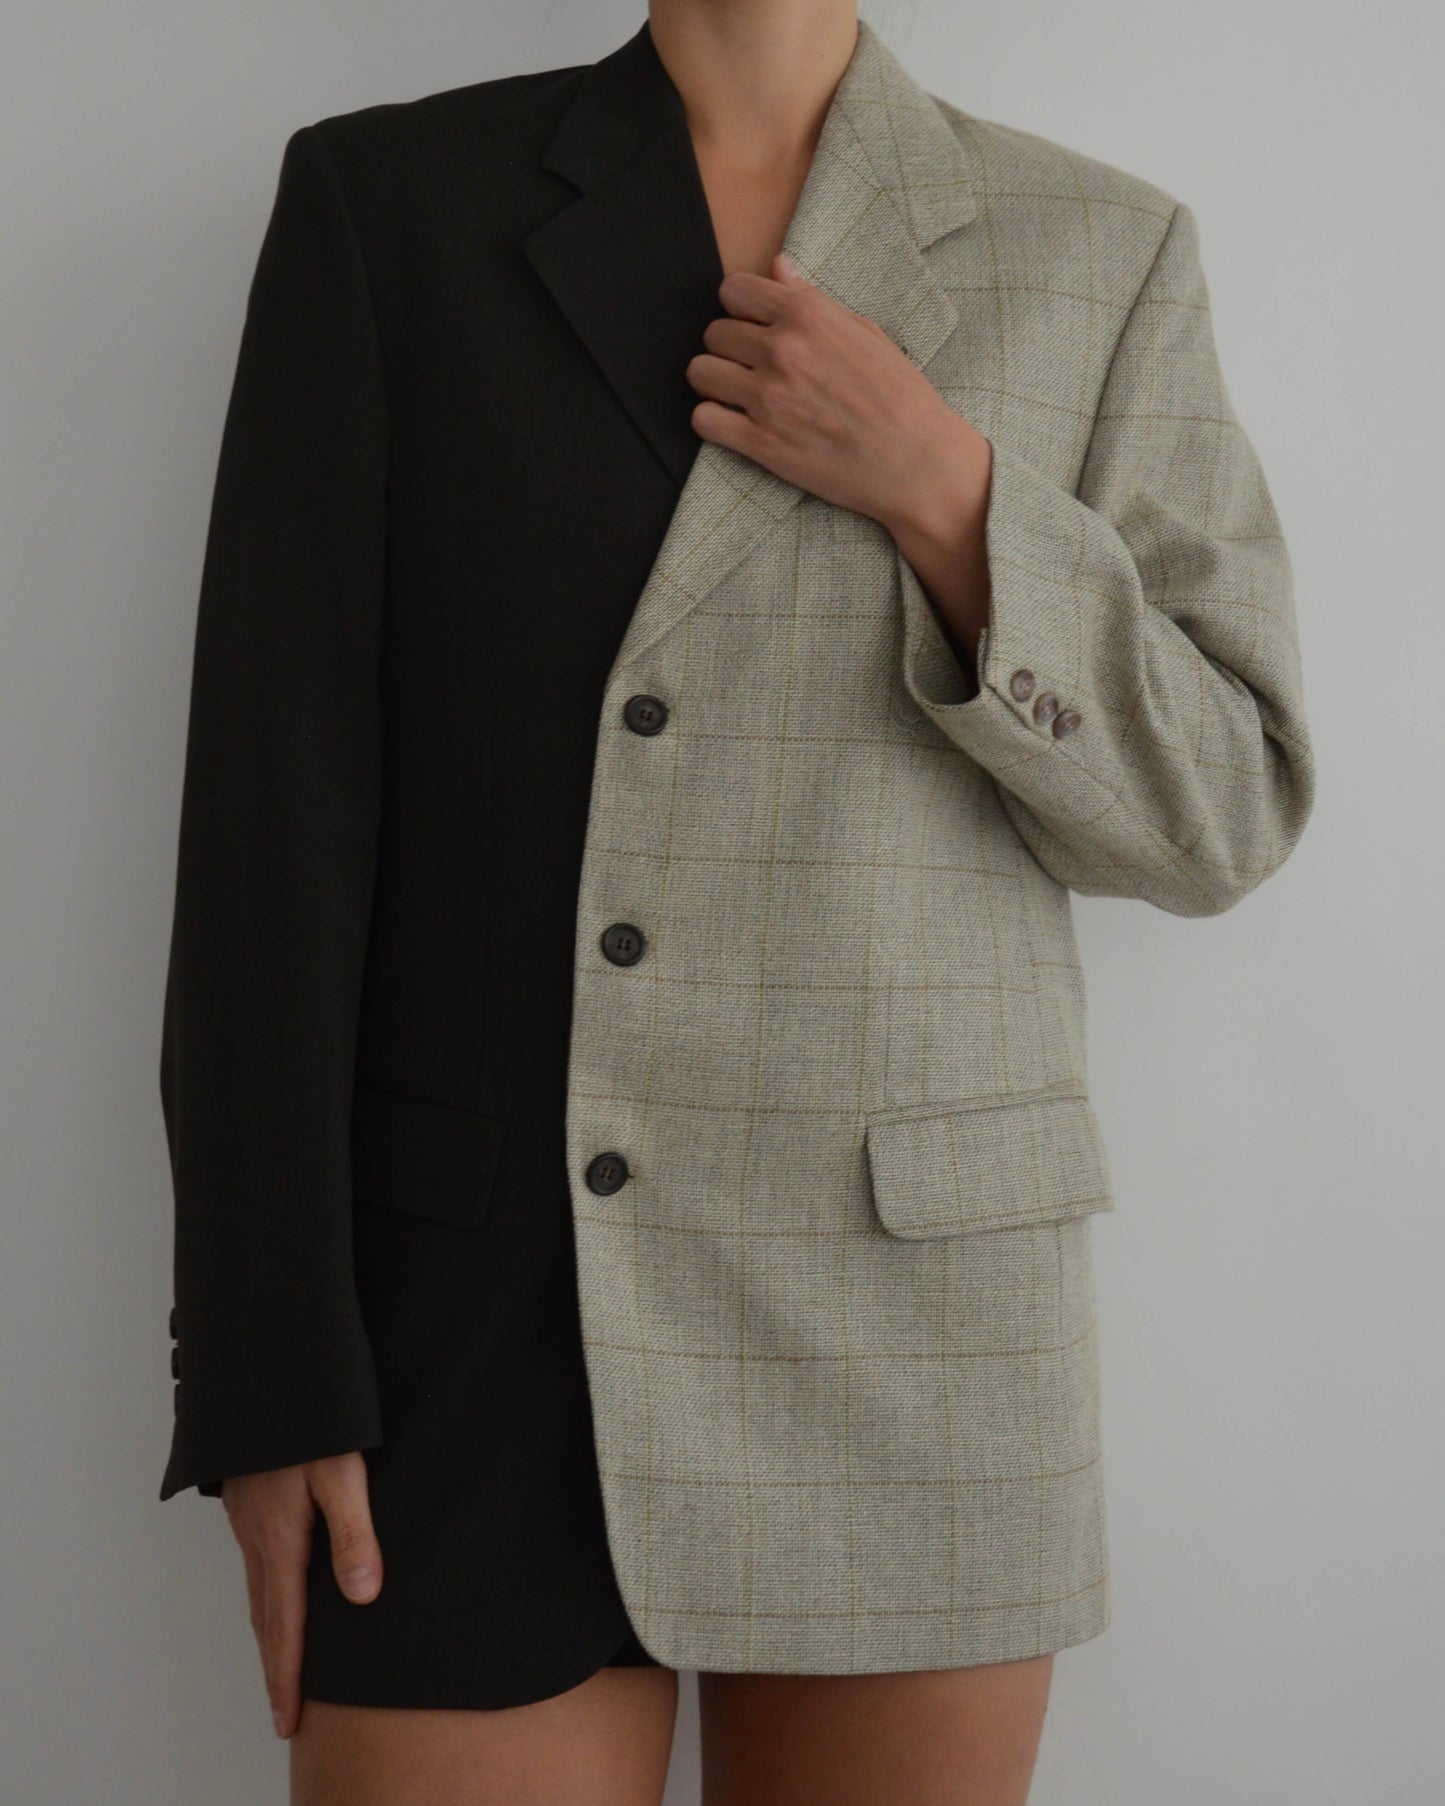 DUO Blazer - Beige and Olive (S/L)